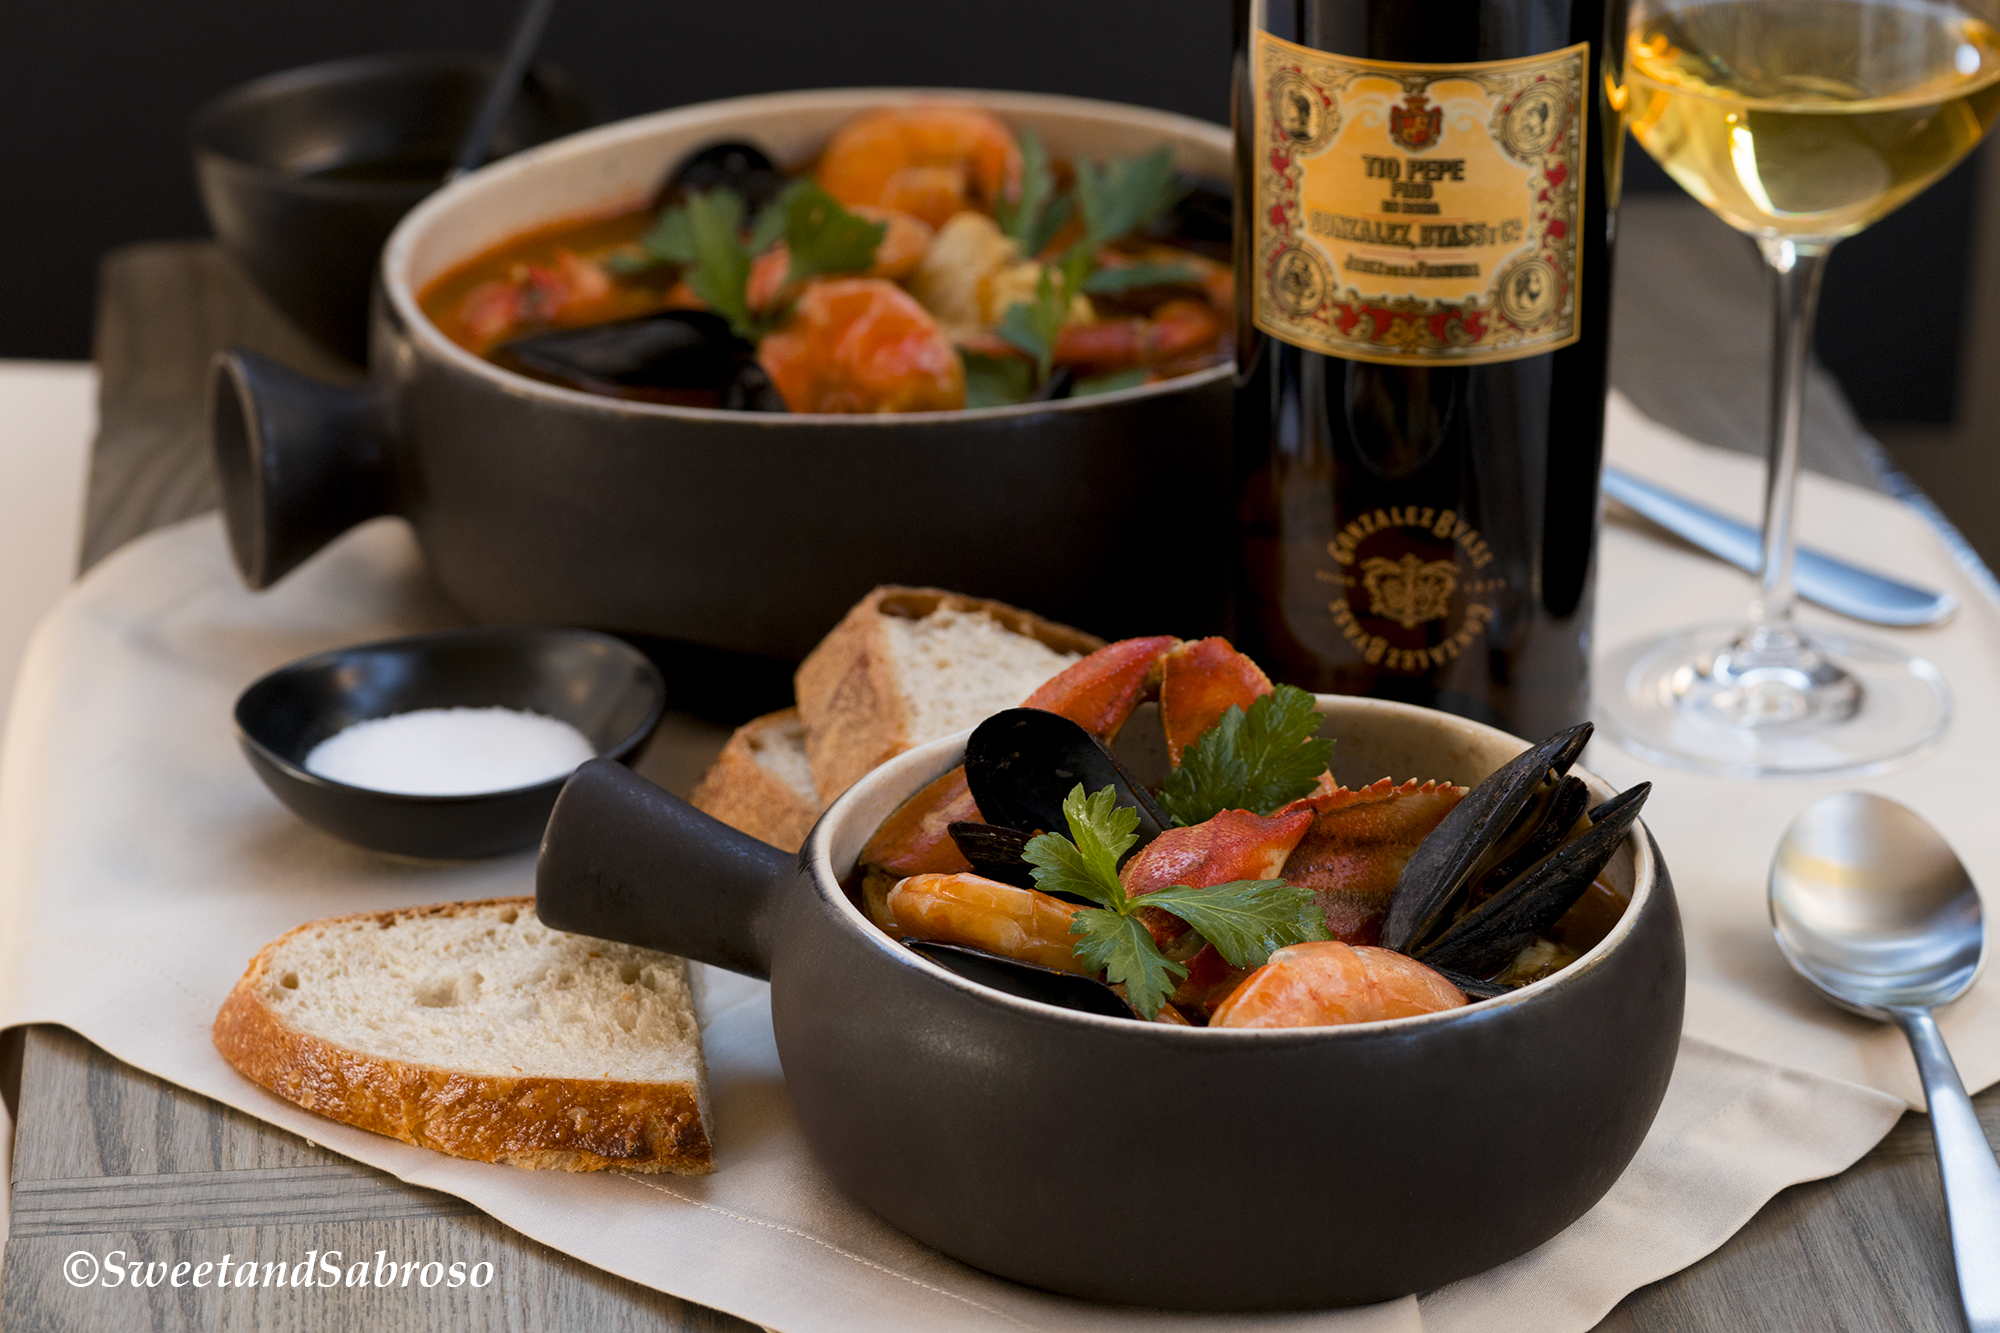 California-Coastal-Seafood-Stew- Served-In-Small-Grey-Bowl-With-Shrimp-Mussels-Dungeness-Crab-With-Sourdough-Bread-Bottle-of-Wine-and-Larger-Serving-Bowl-In-Background-With-Same-Ingredients